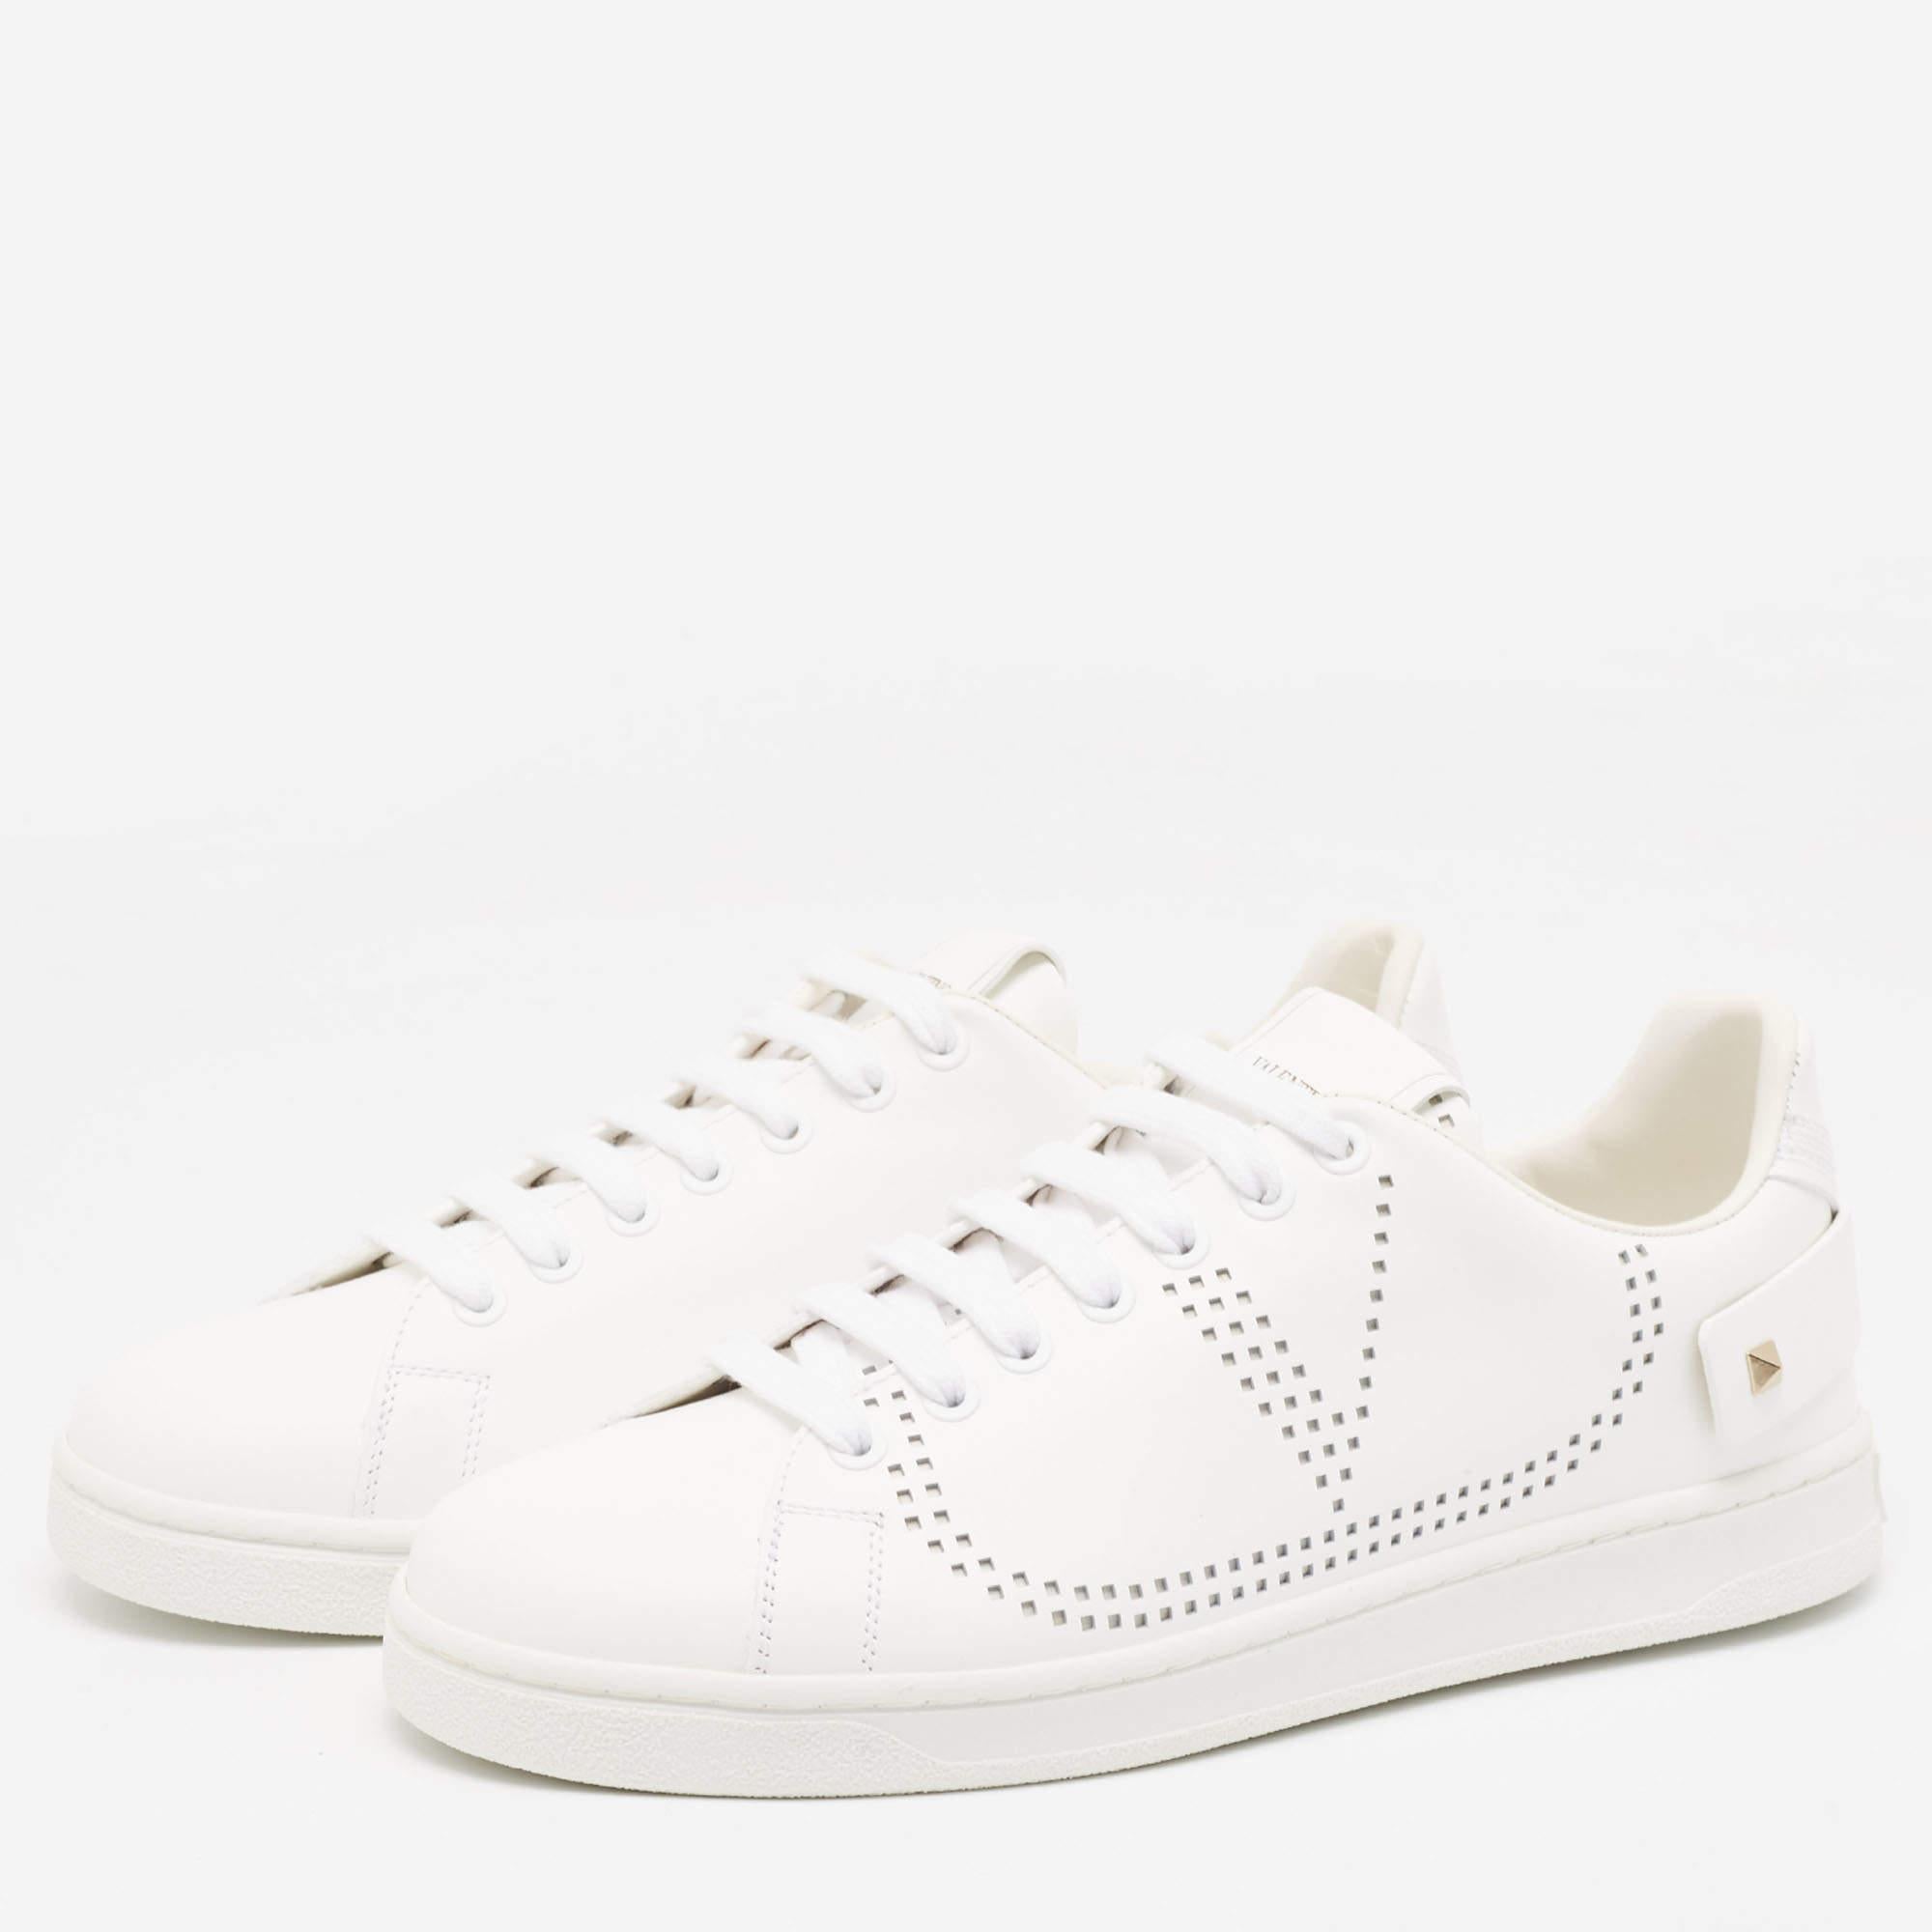 Valentino White Leather Backnet Rockstud Low Top Sneakers Size 39.5 1